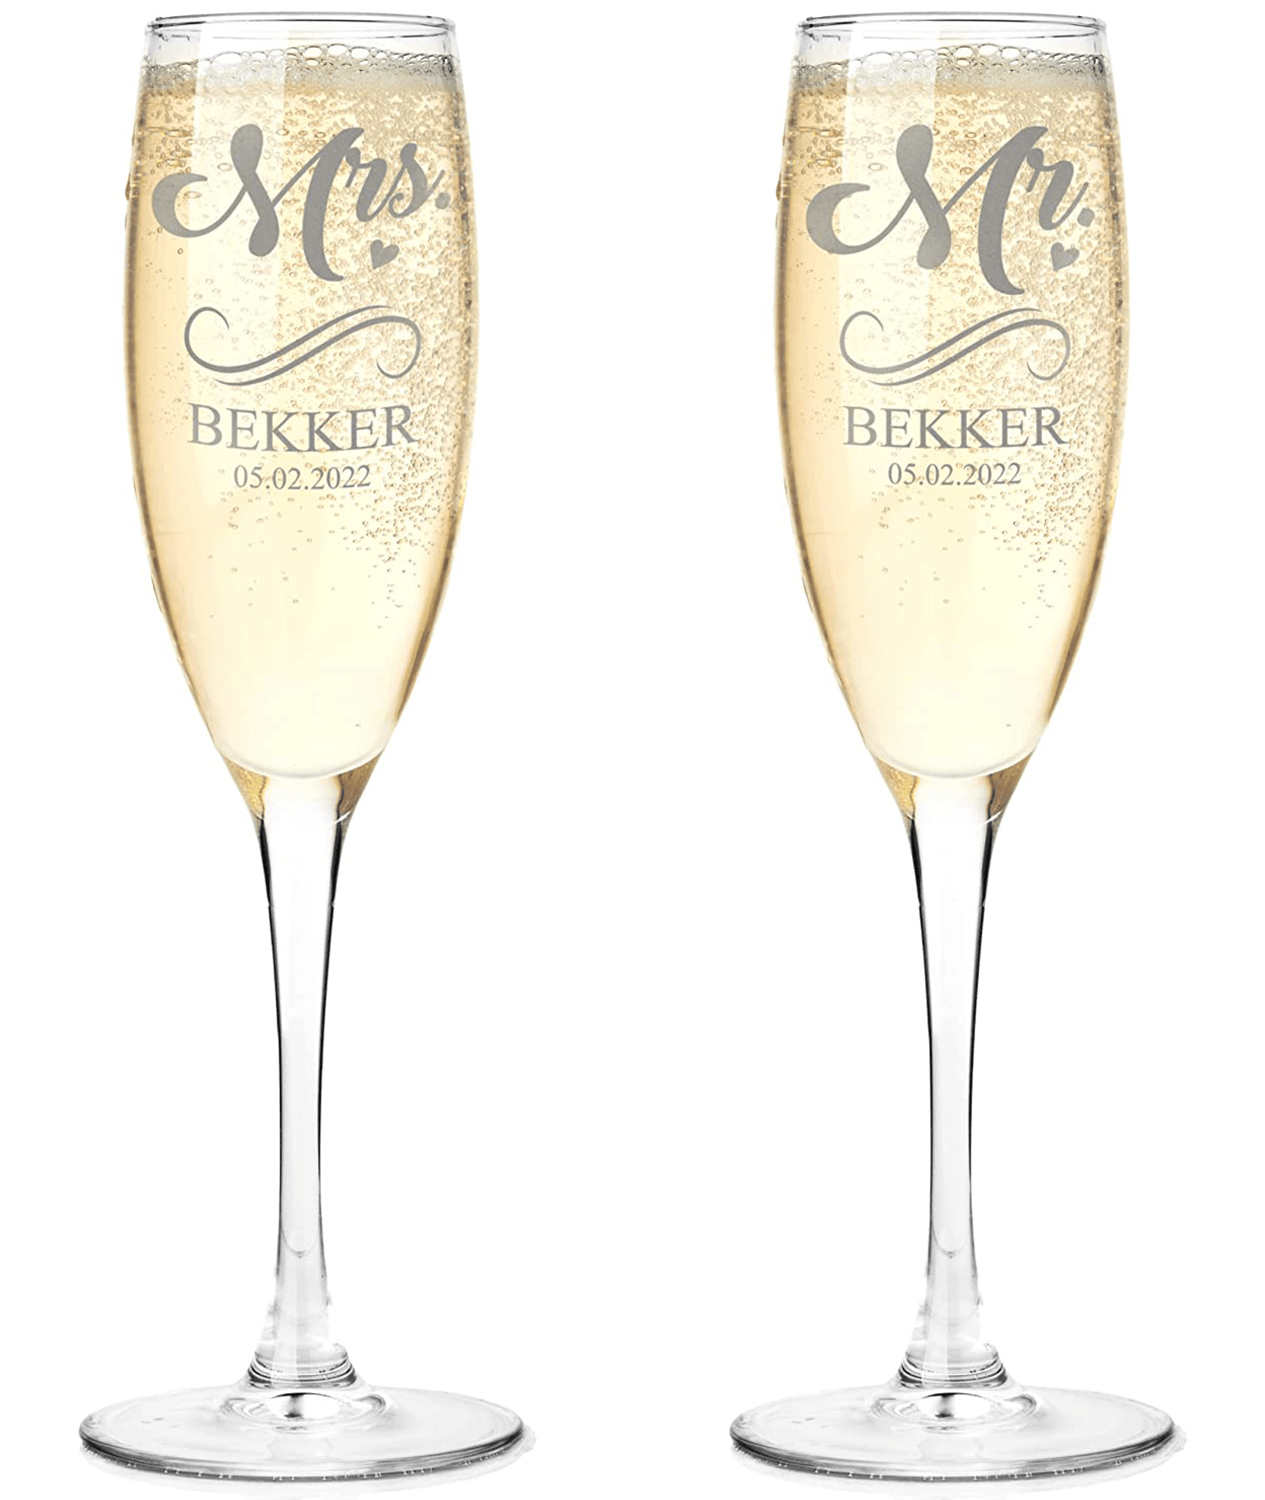 https://giftsinscribed.com/wp-content/uploads/custom-engraved-champagne-glasses-personalized-1265x1500px-giftsinscribed.com_.png